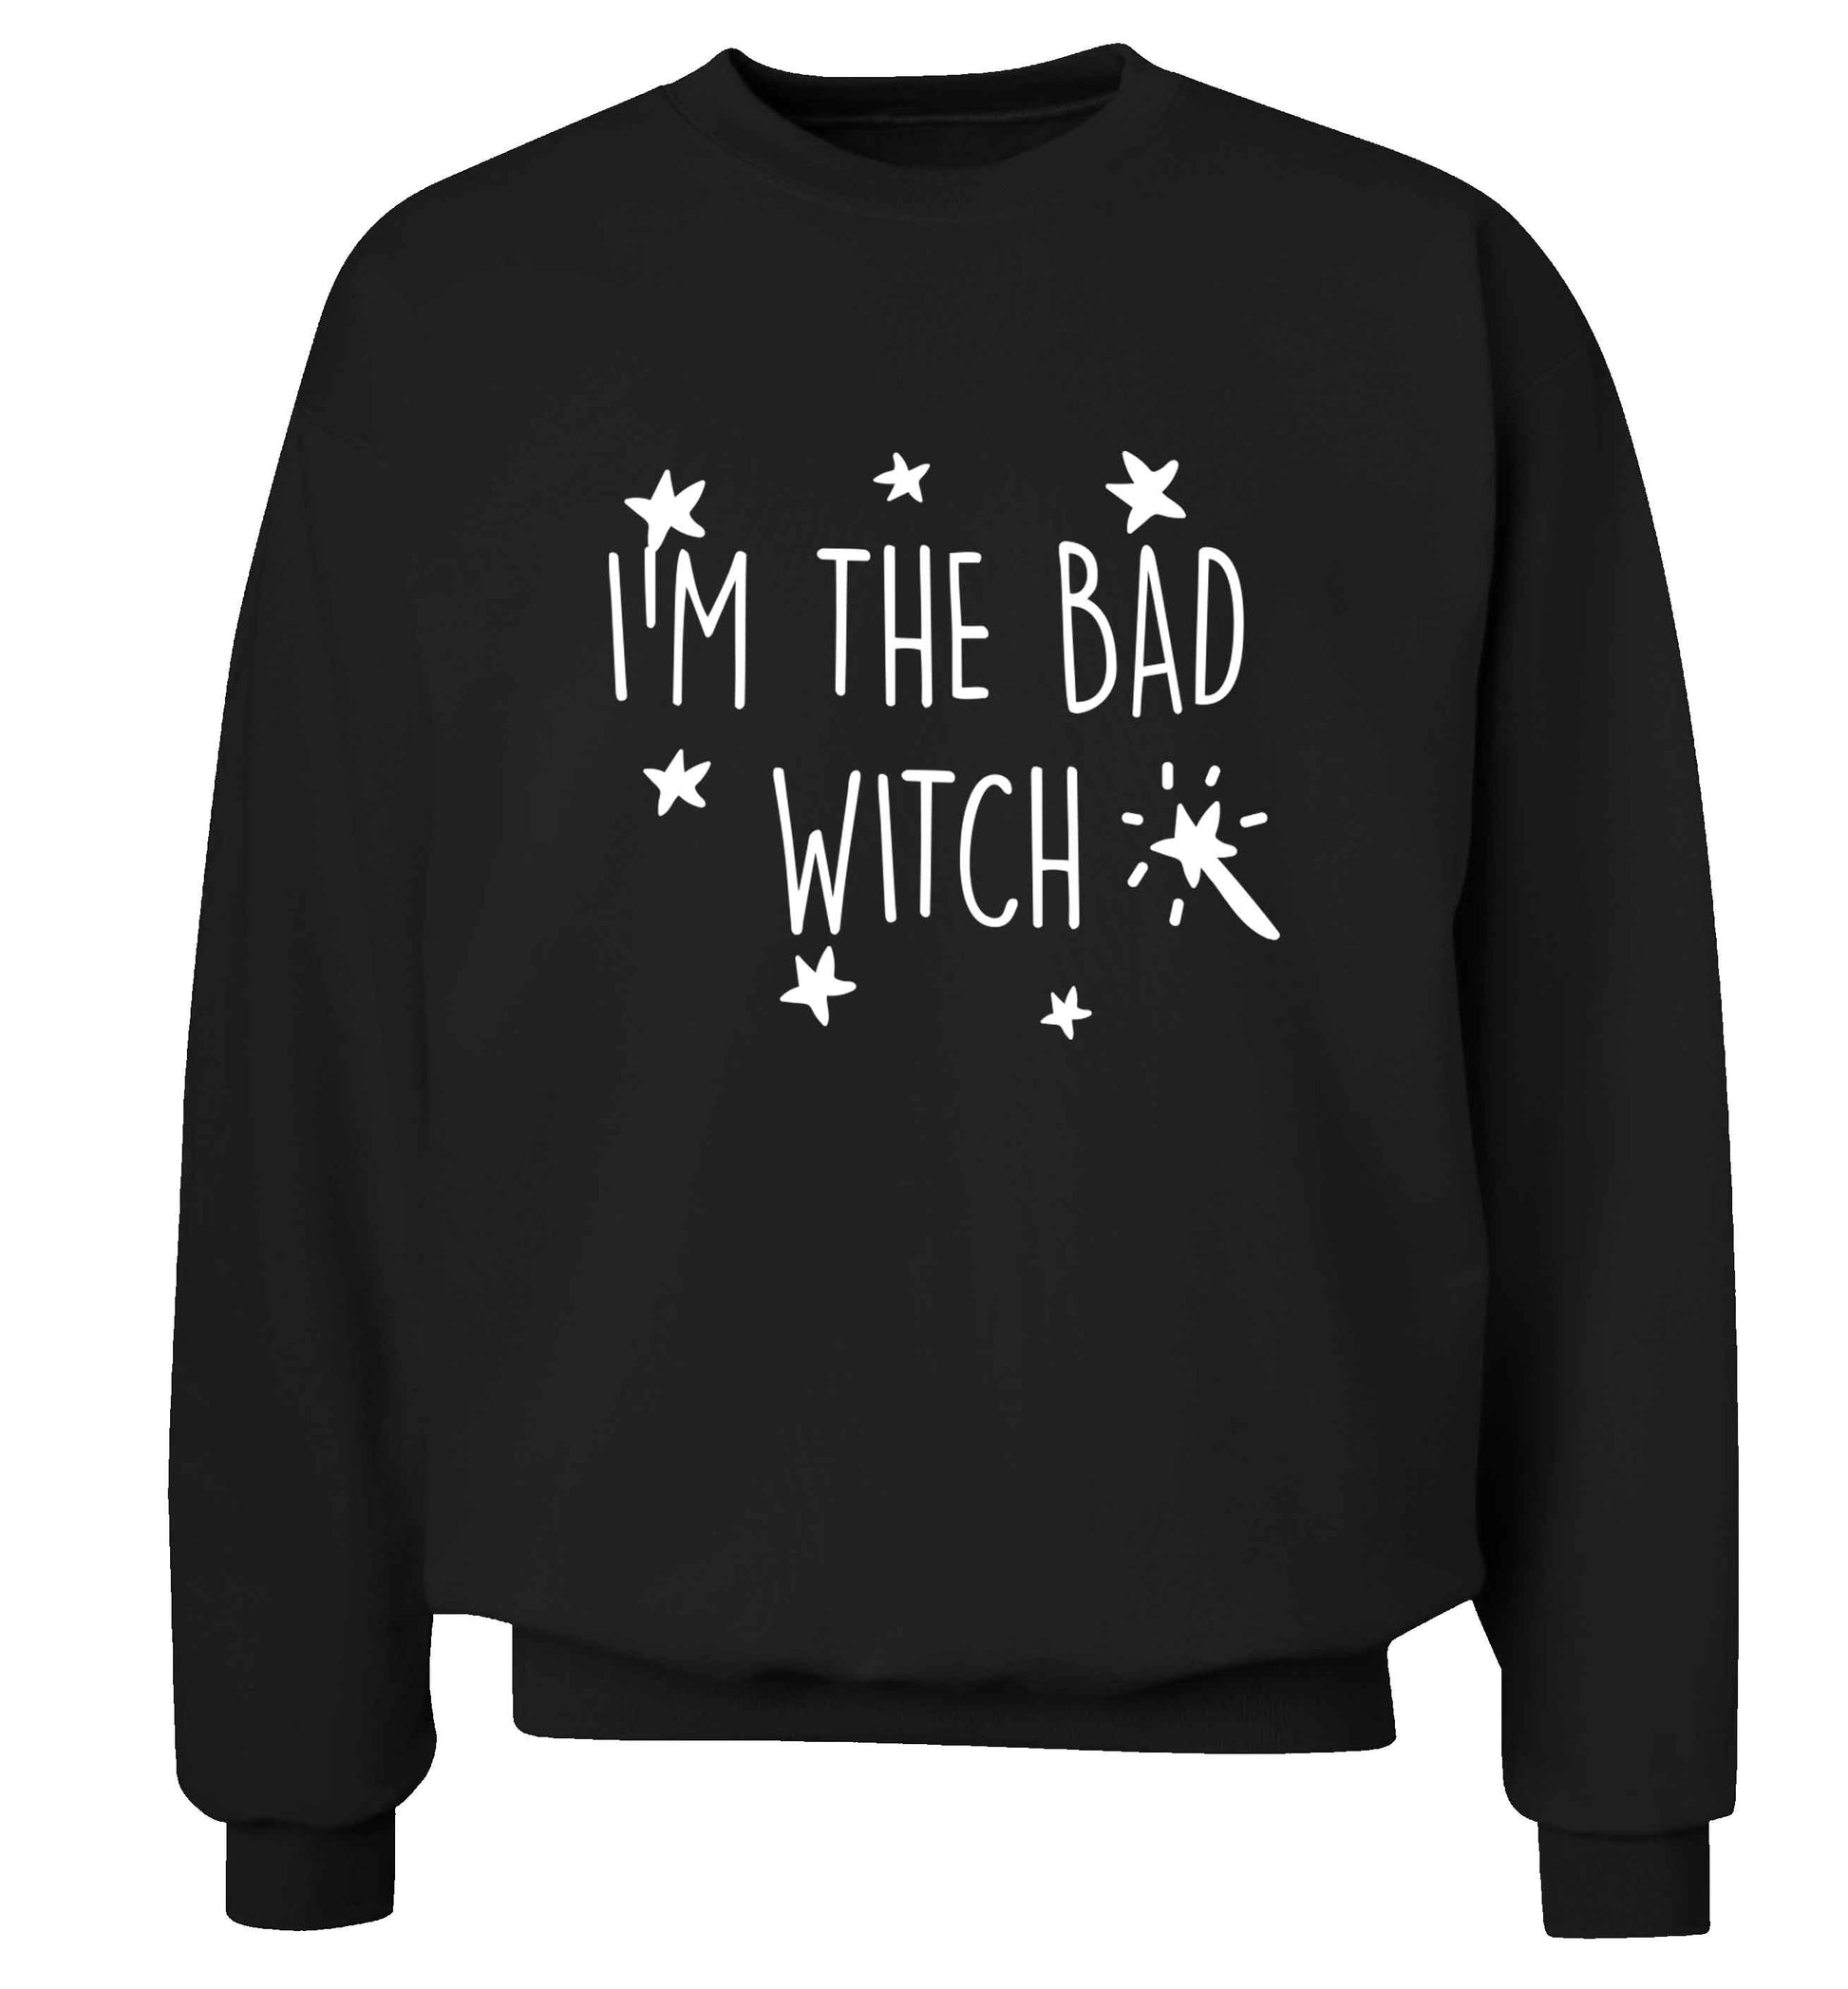 Bad witch adult's unisex black sweater 2XL